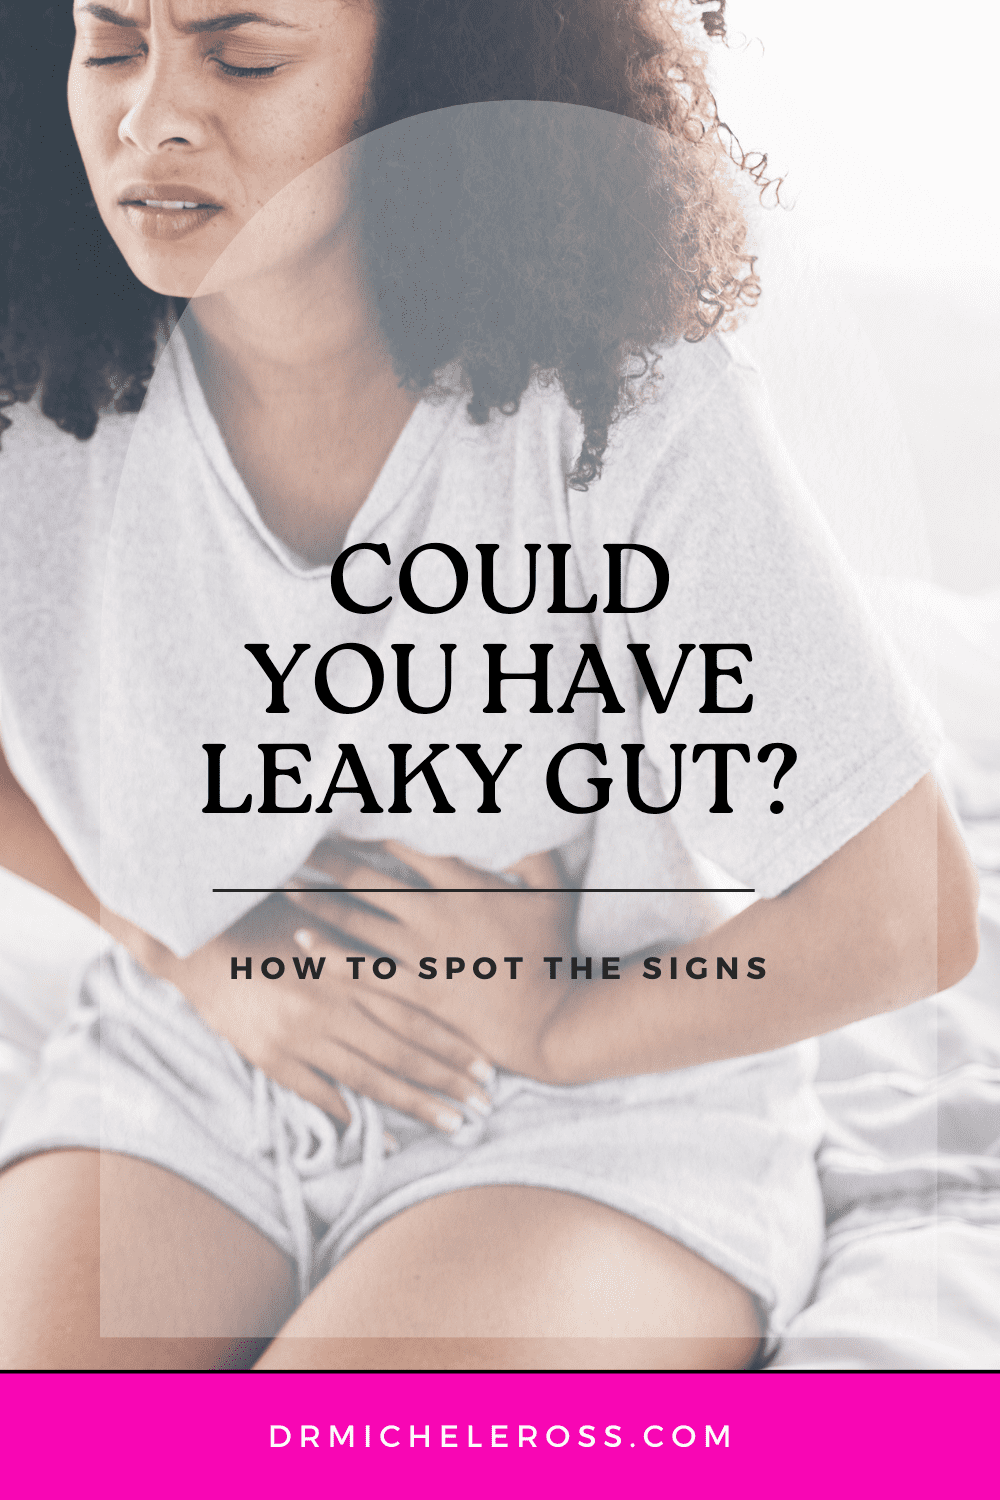 woman with stomach pain sign of leaky gut syndrome